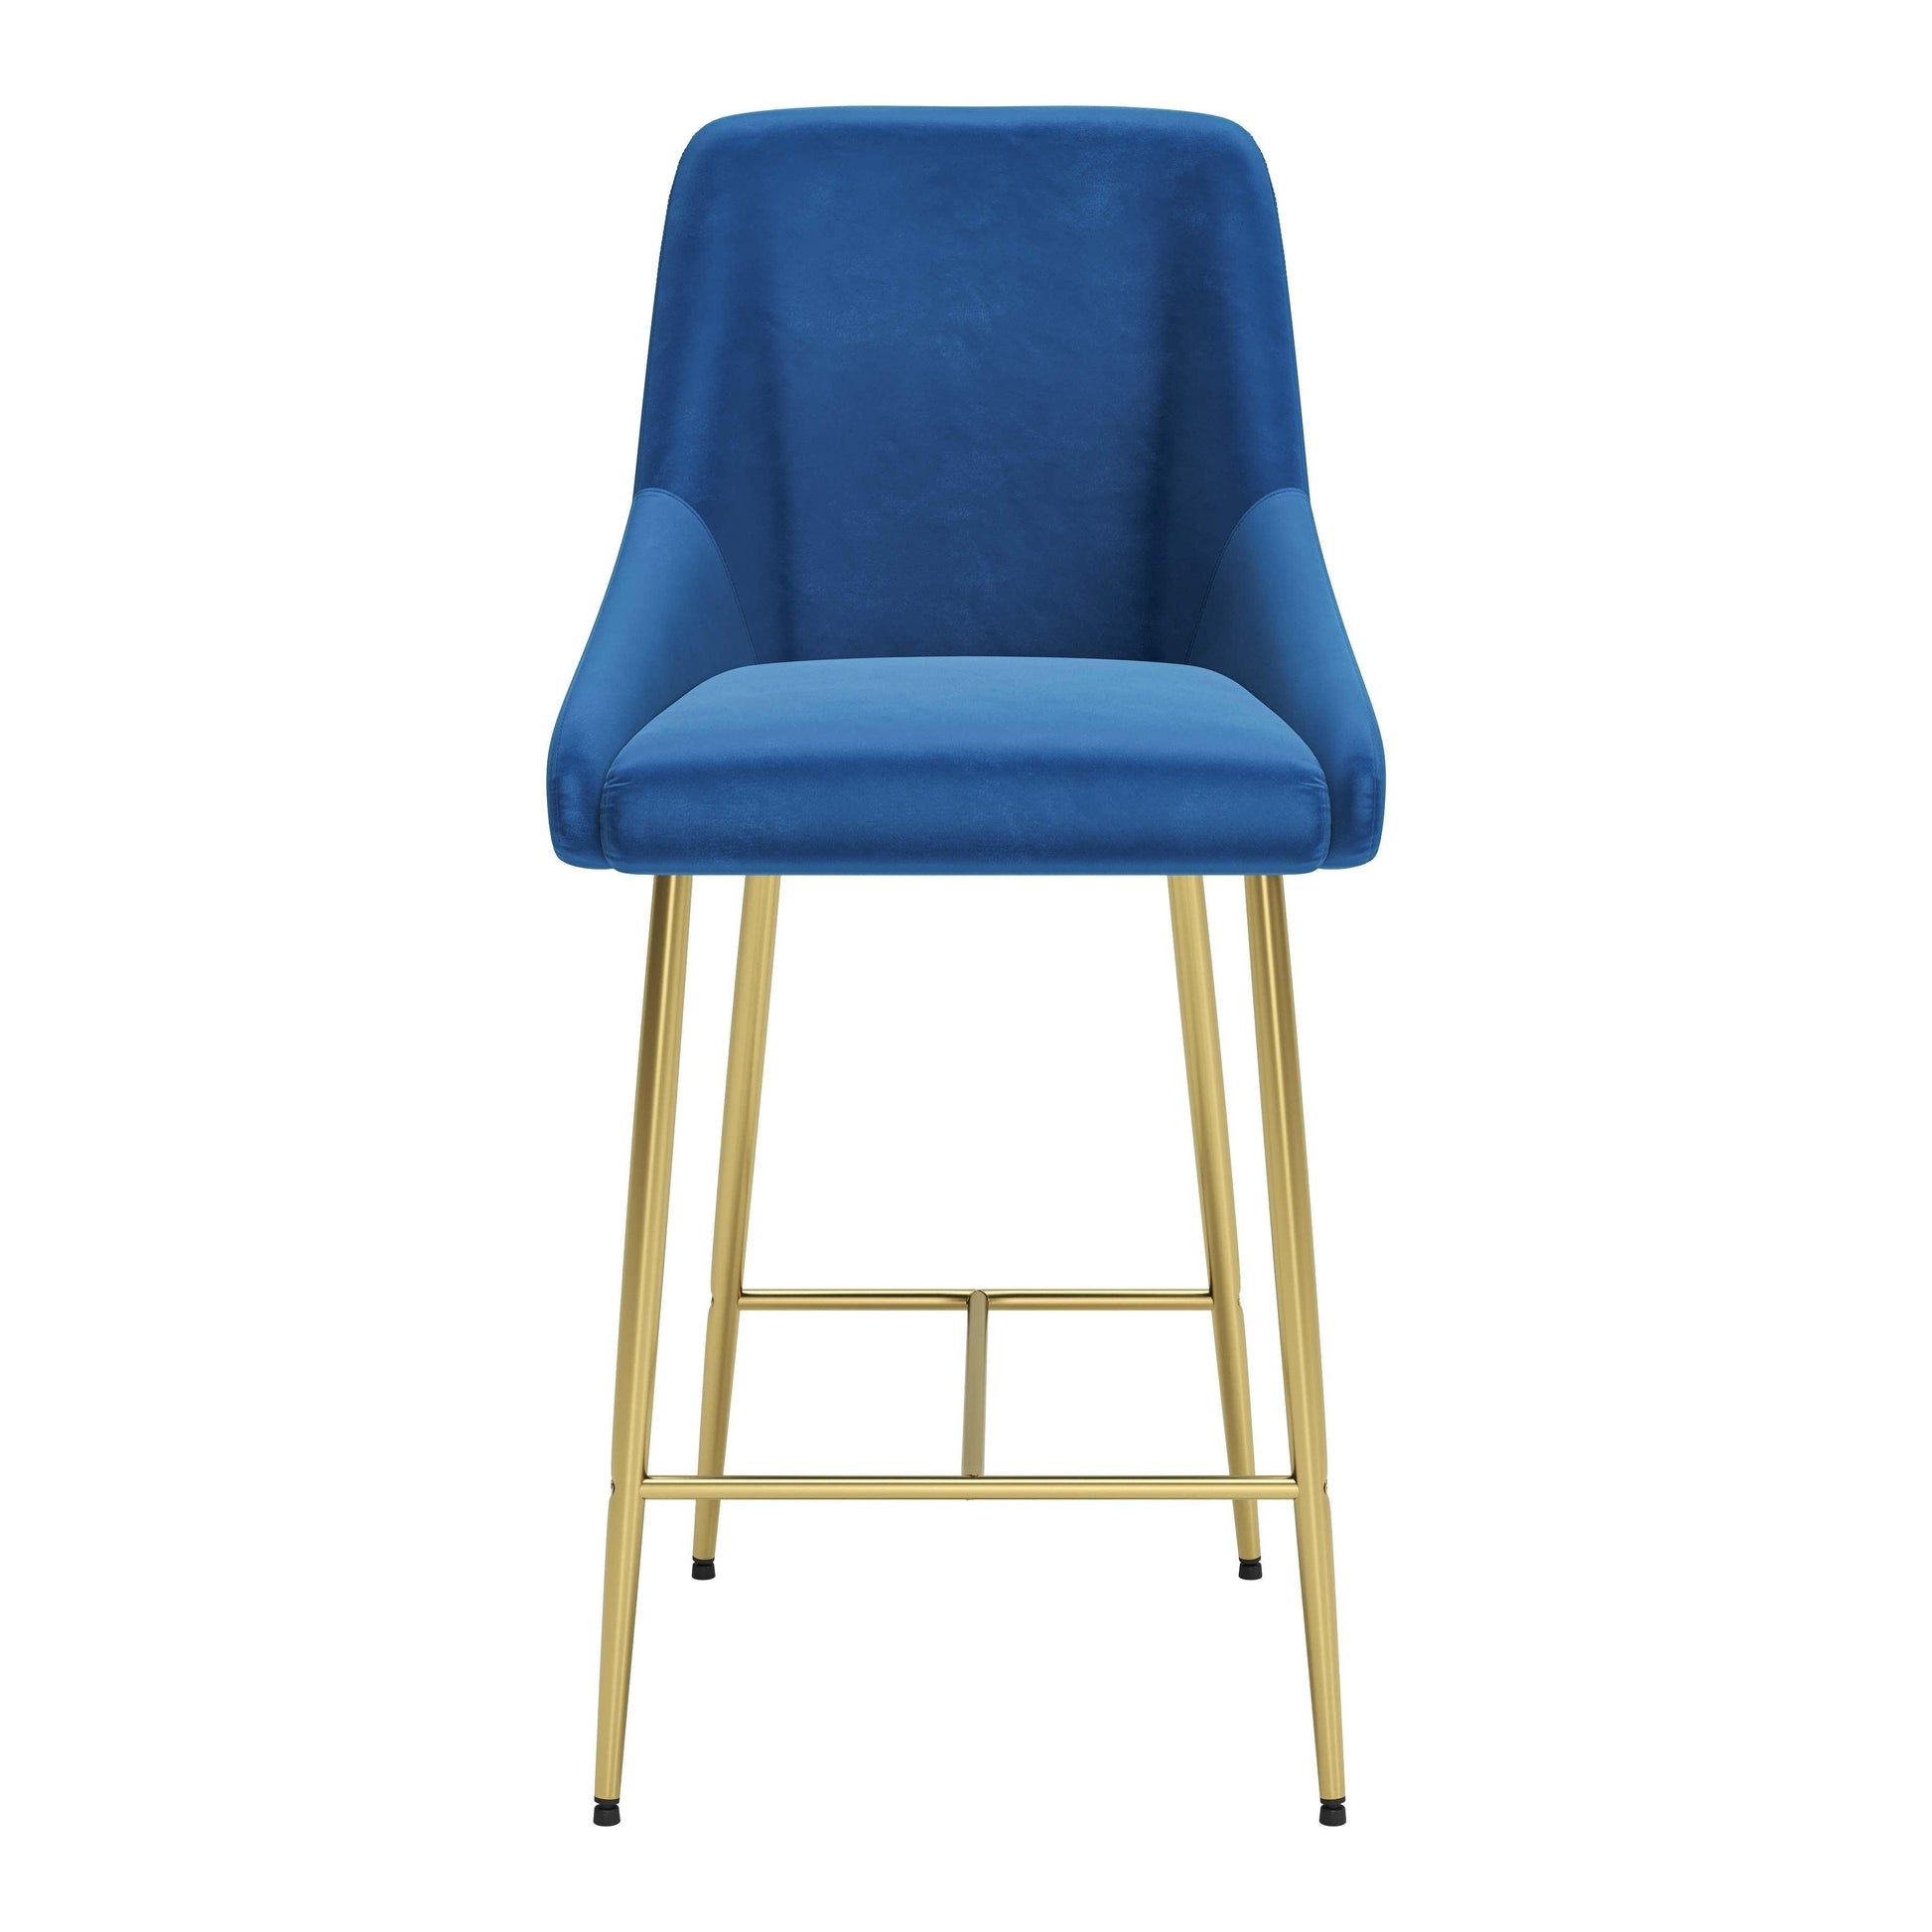 Madelaine Counter Chair Navy - Sideboards and Things Accents_Gold, Back Type_Full Back, Back Type_With Back, Brand_Zuo Modern, Color_Blue, Color_Gold, Depth_20-30, Finish_Powder Coated, Height_30-40, Materials_Metal, Materials_Wood, Metal Type_Steel, Product Type_Counter Height, Shape_Armless, Upholstery Type_Fabric Blend, Upholstery Type_Polyester, Width_10-20, Wood Species_Plywood